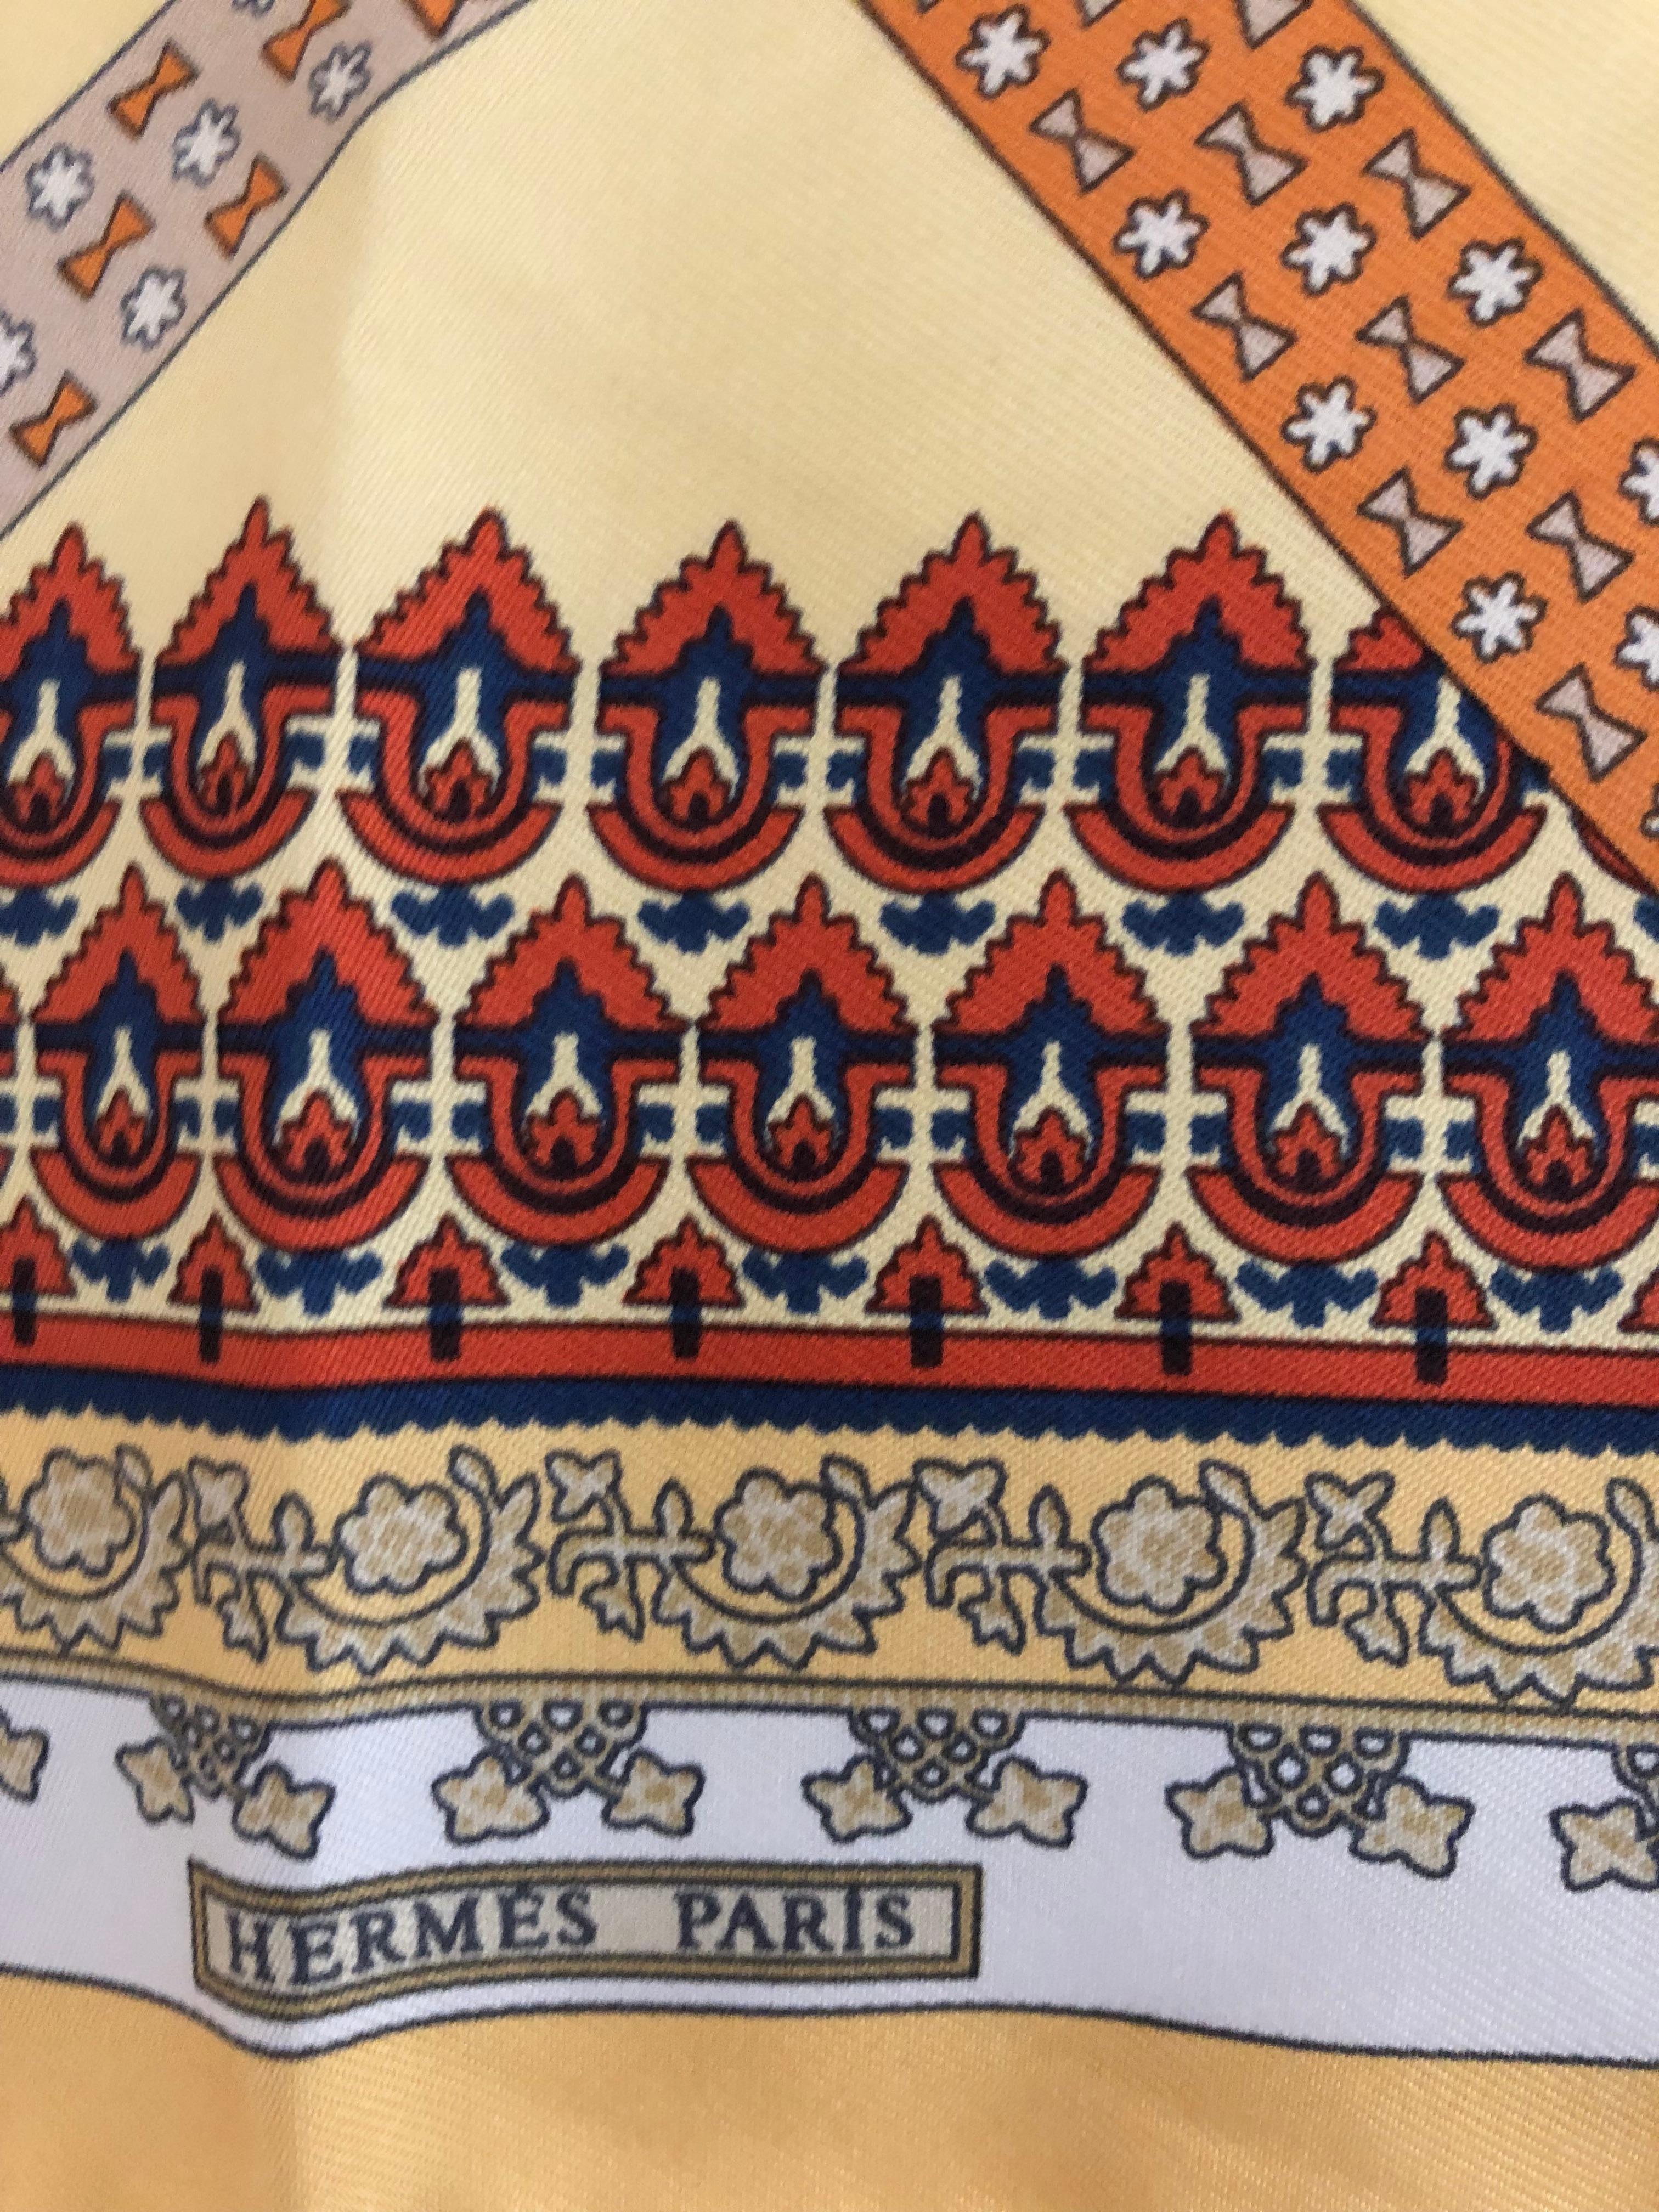 Julie Abadie is the designer for this lovely Hermes silk square with graphics that remind one of Middle Eastern architectural elements. The hand rolled hems are nice and plump and the care tag is present.